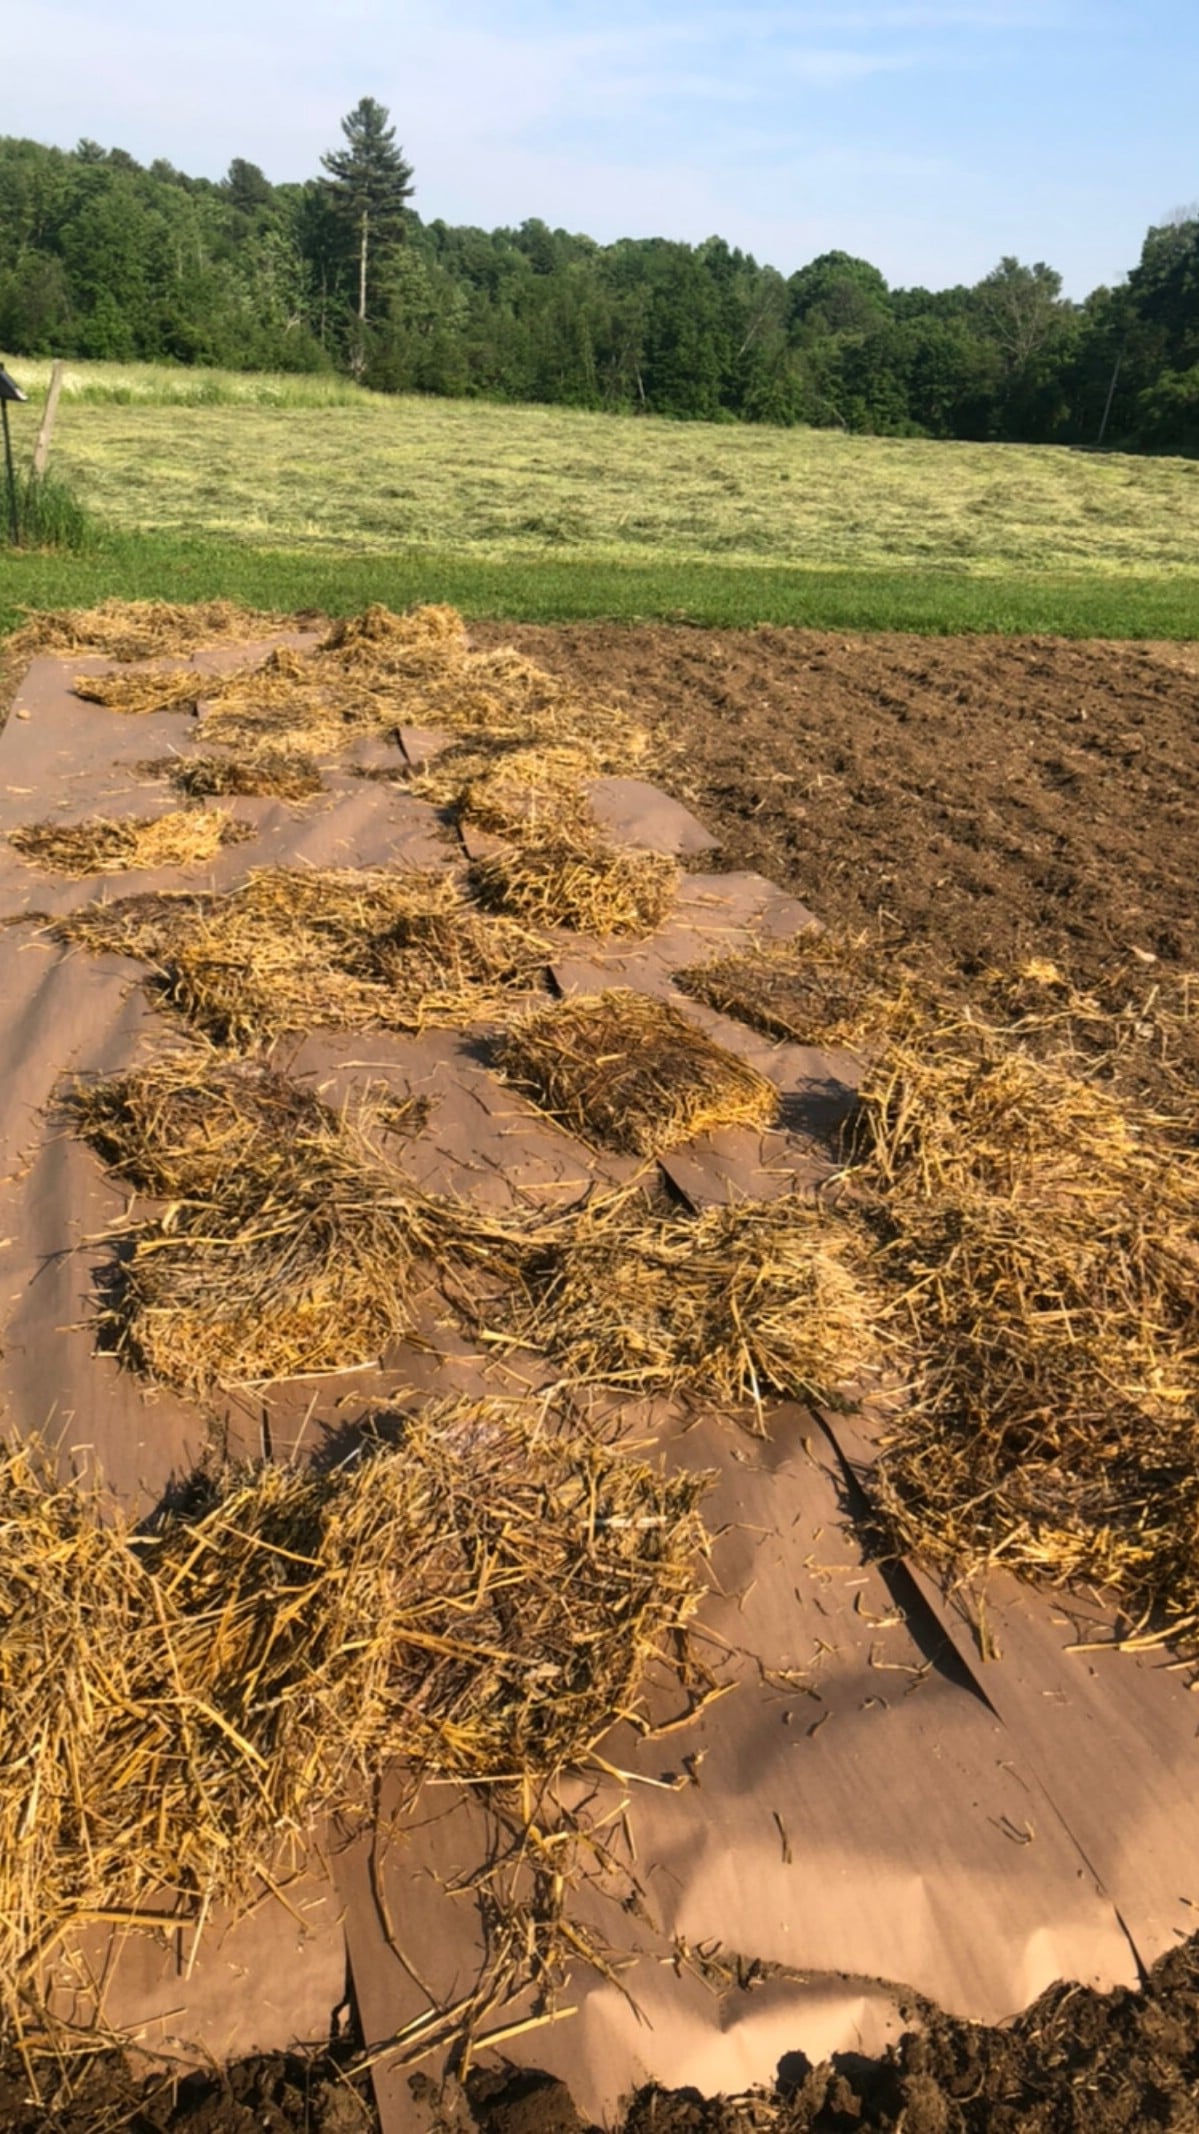 Flakes of straw laid out over weed paper ready for spreading